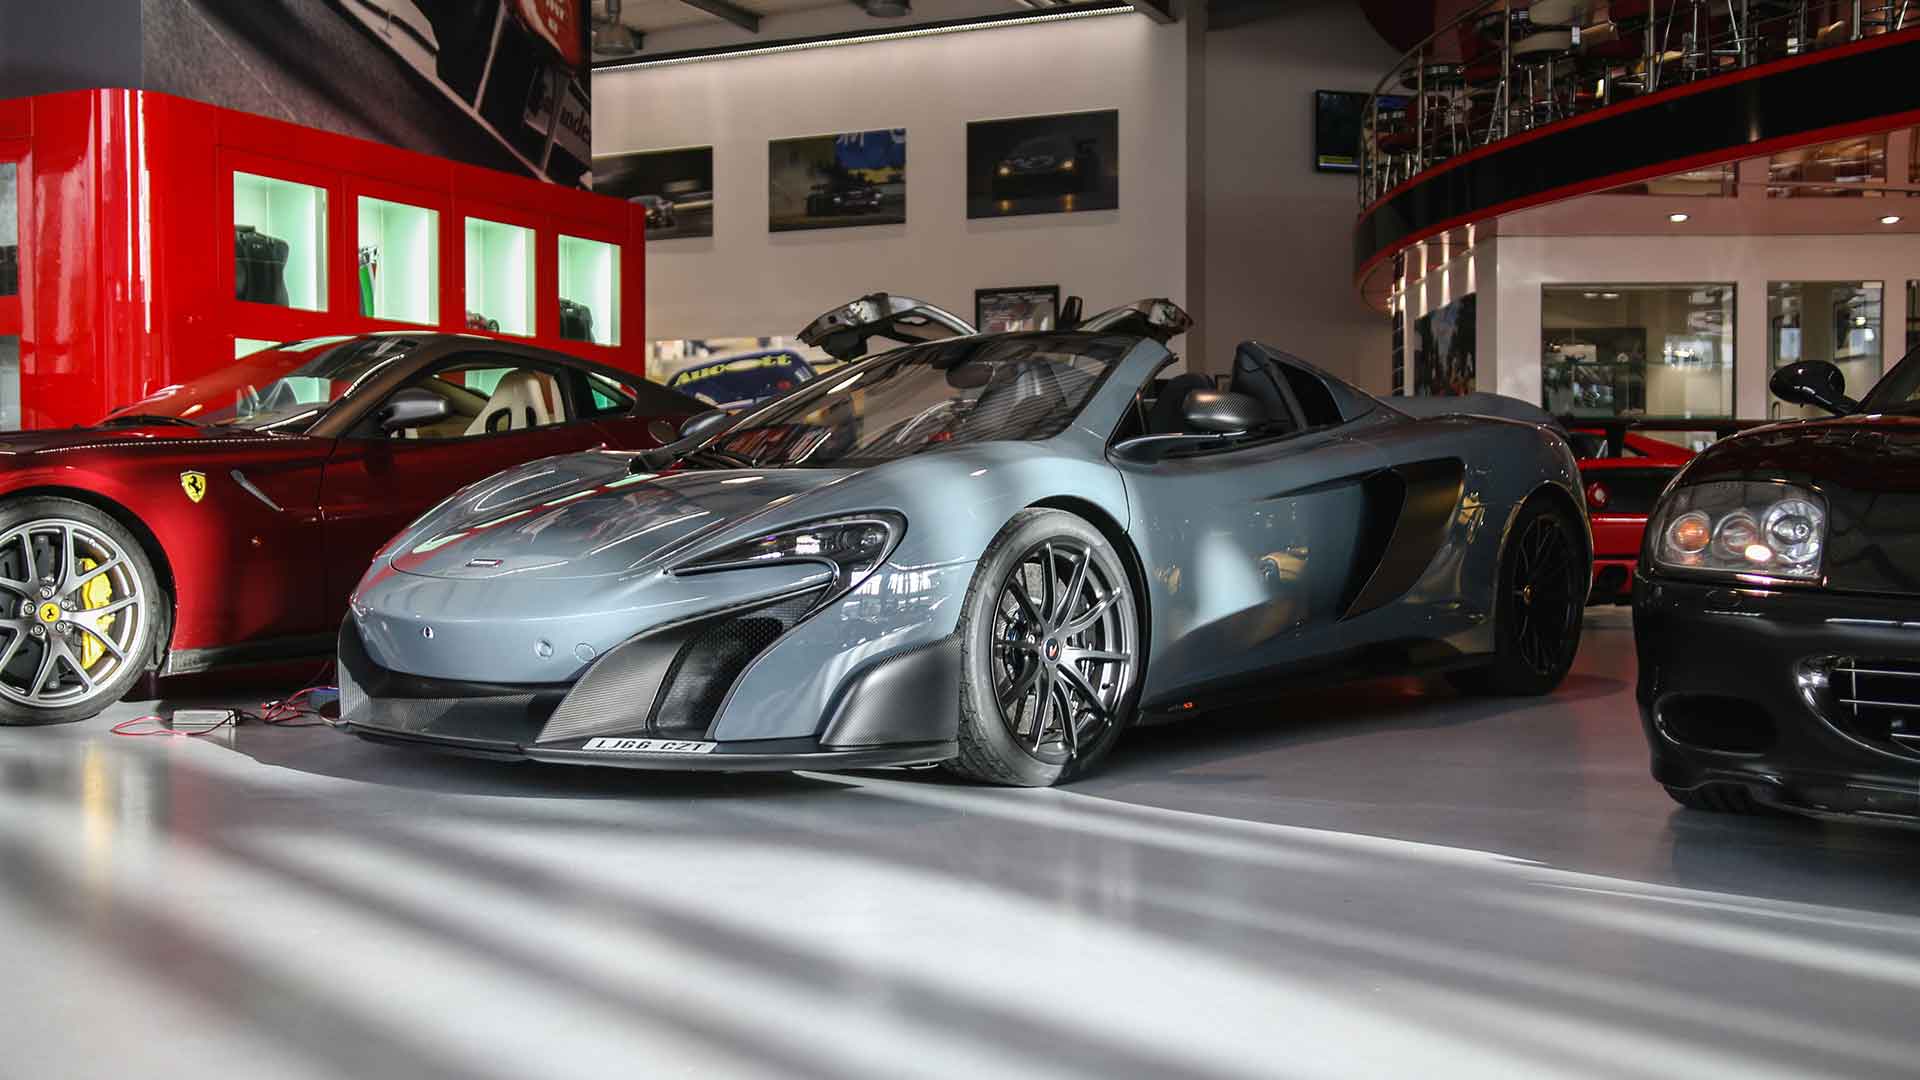 Video: London’s most amazing supercar showroom